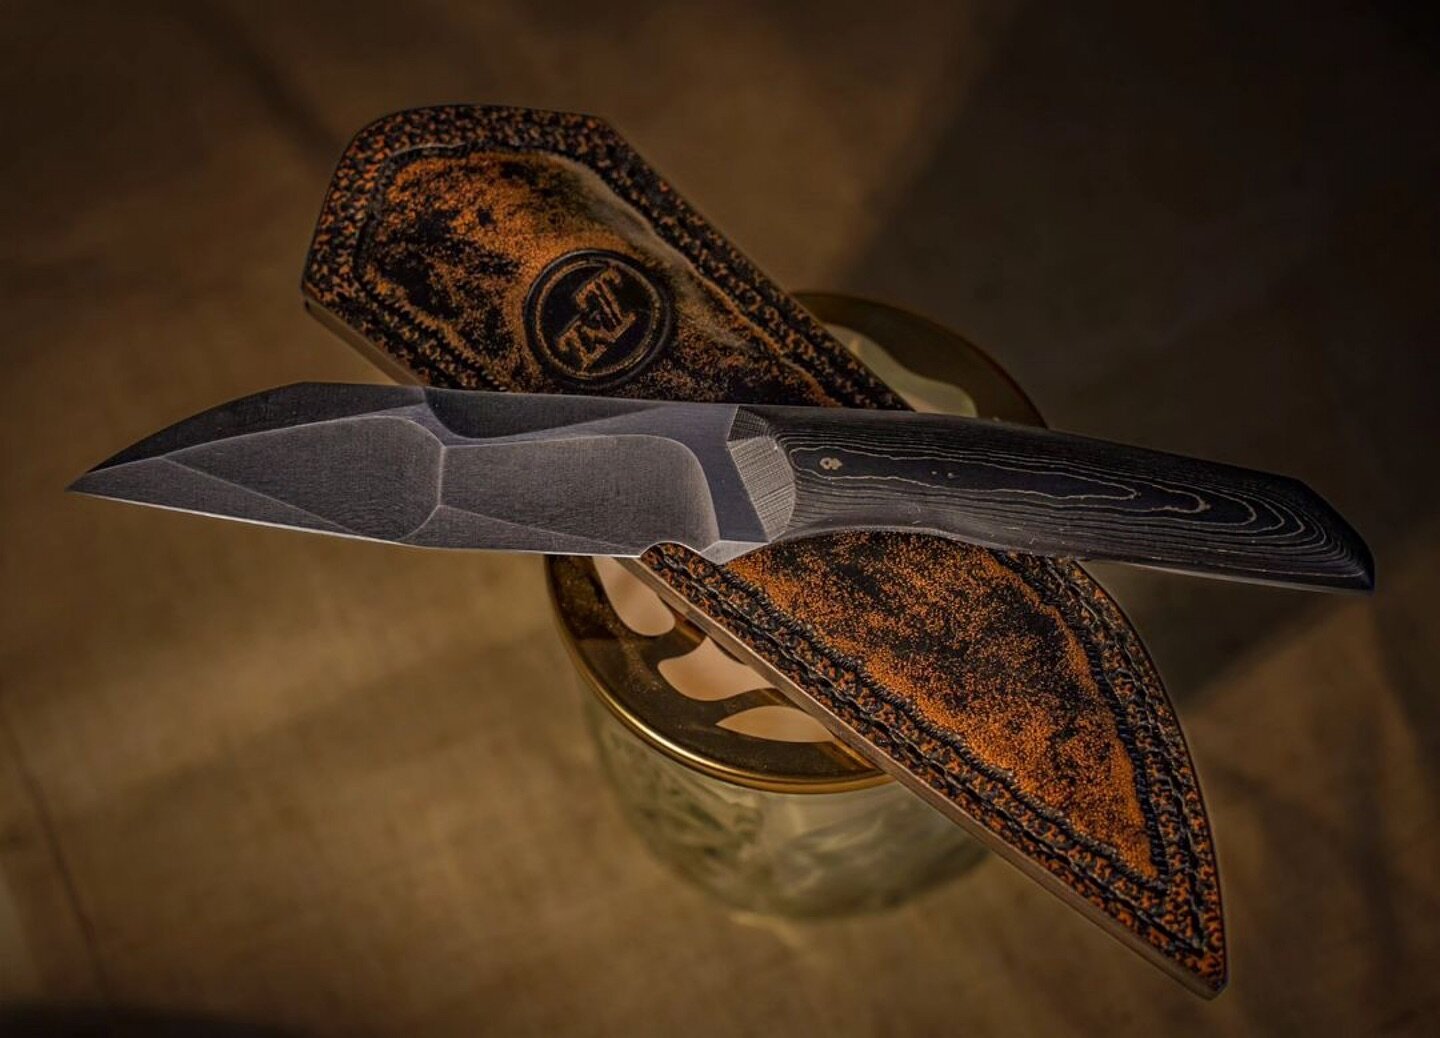 We are proud to have knifemaker and grindmaster Toni N. Tietzel @tnt_knives exhibiting with us at the 2024 NYCKS! This piece will be available only at the show! 

The 2024 NYCKS will be a part of a grand weekend for knife enthusiasts, which will kick